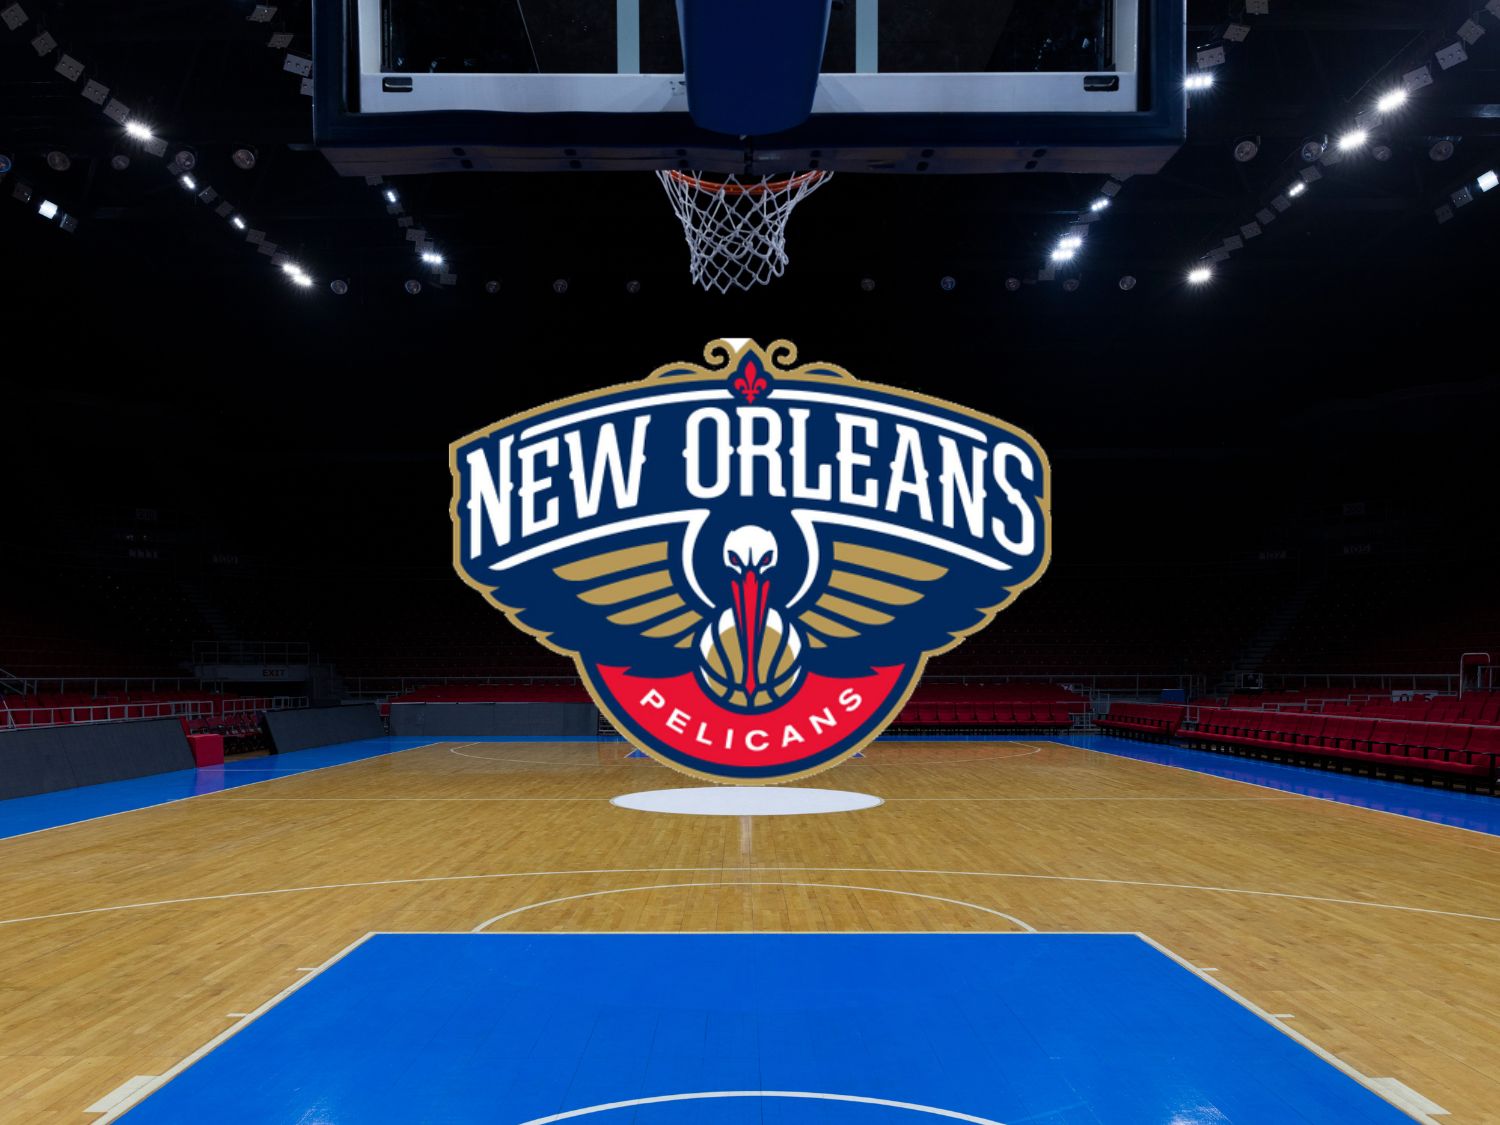 New Orleans Pelicans Tickets and Seats